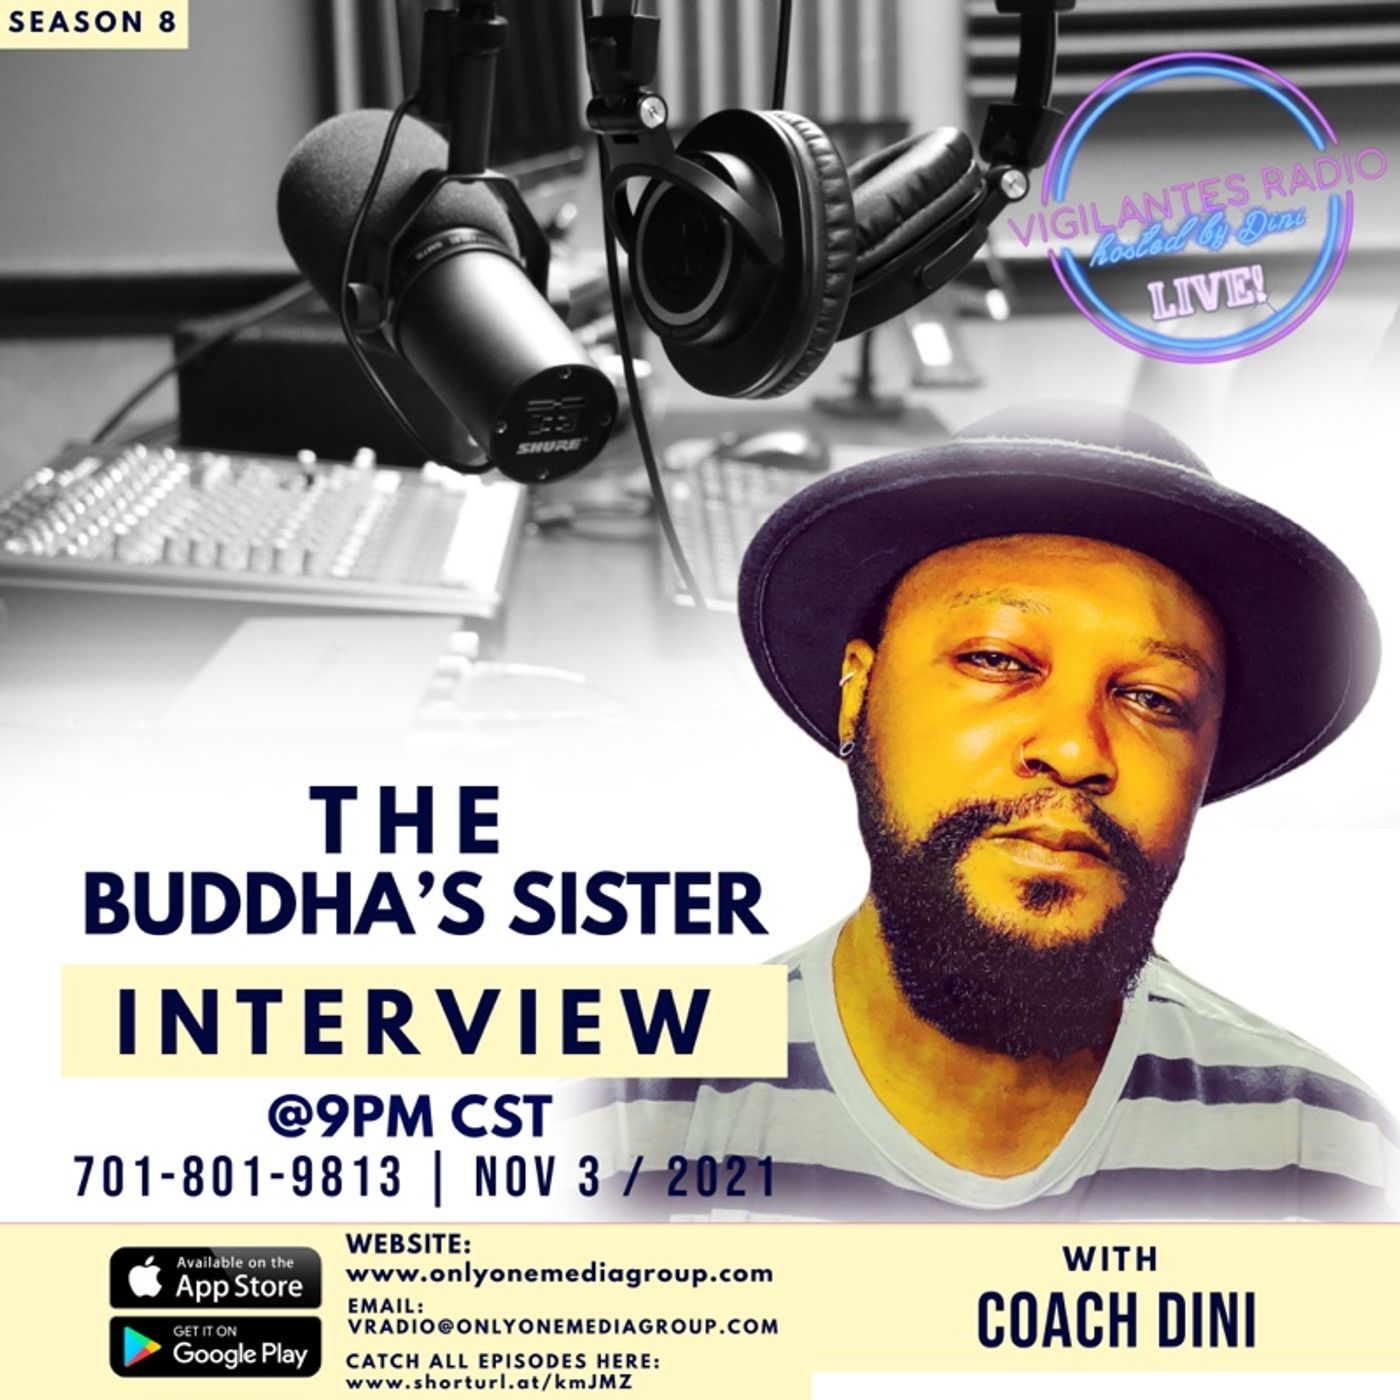 The Buddha's Sister Interview. Image